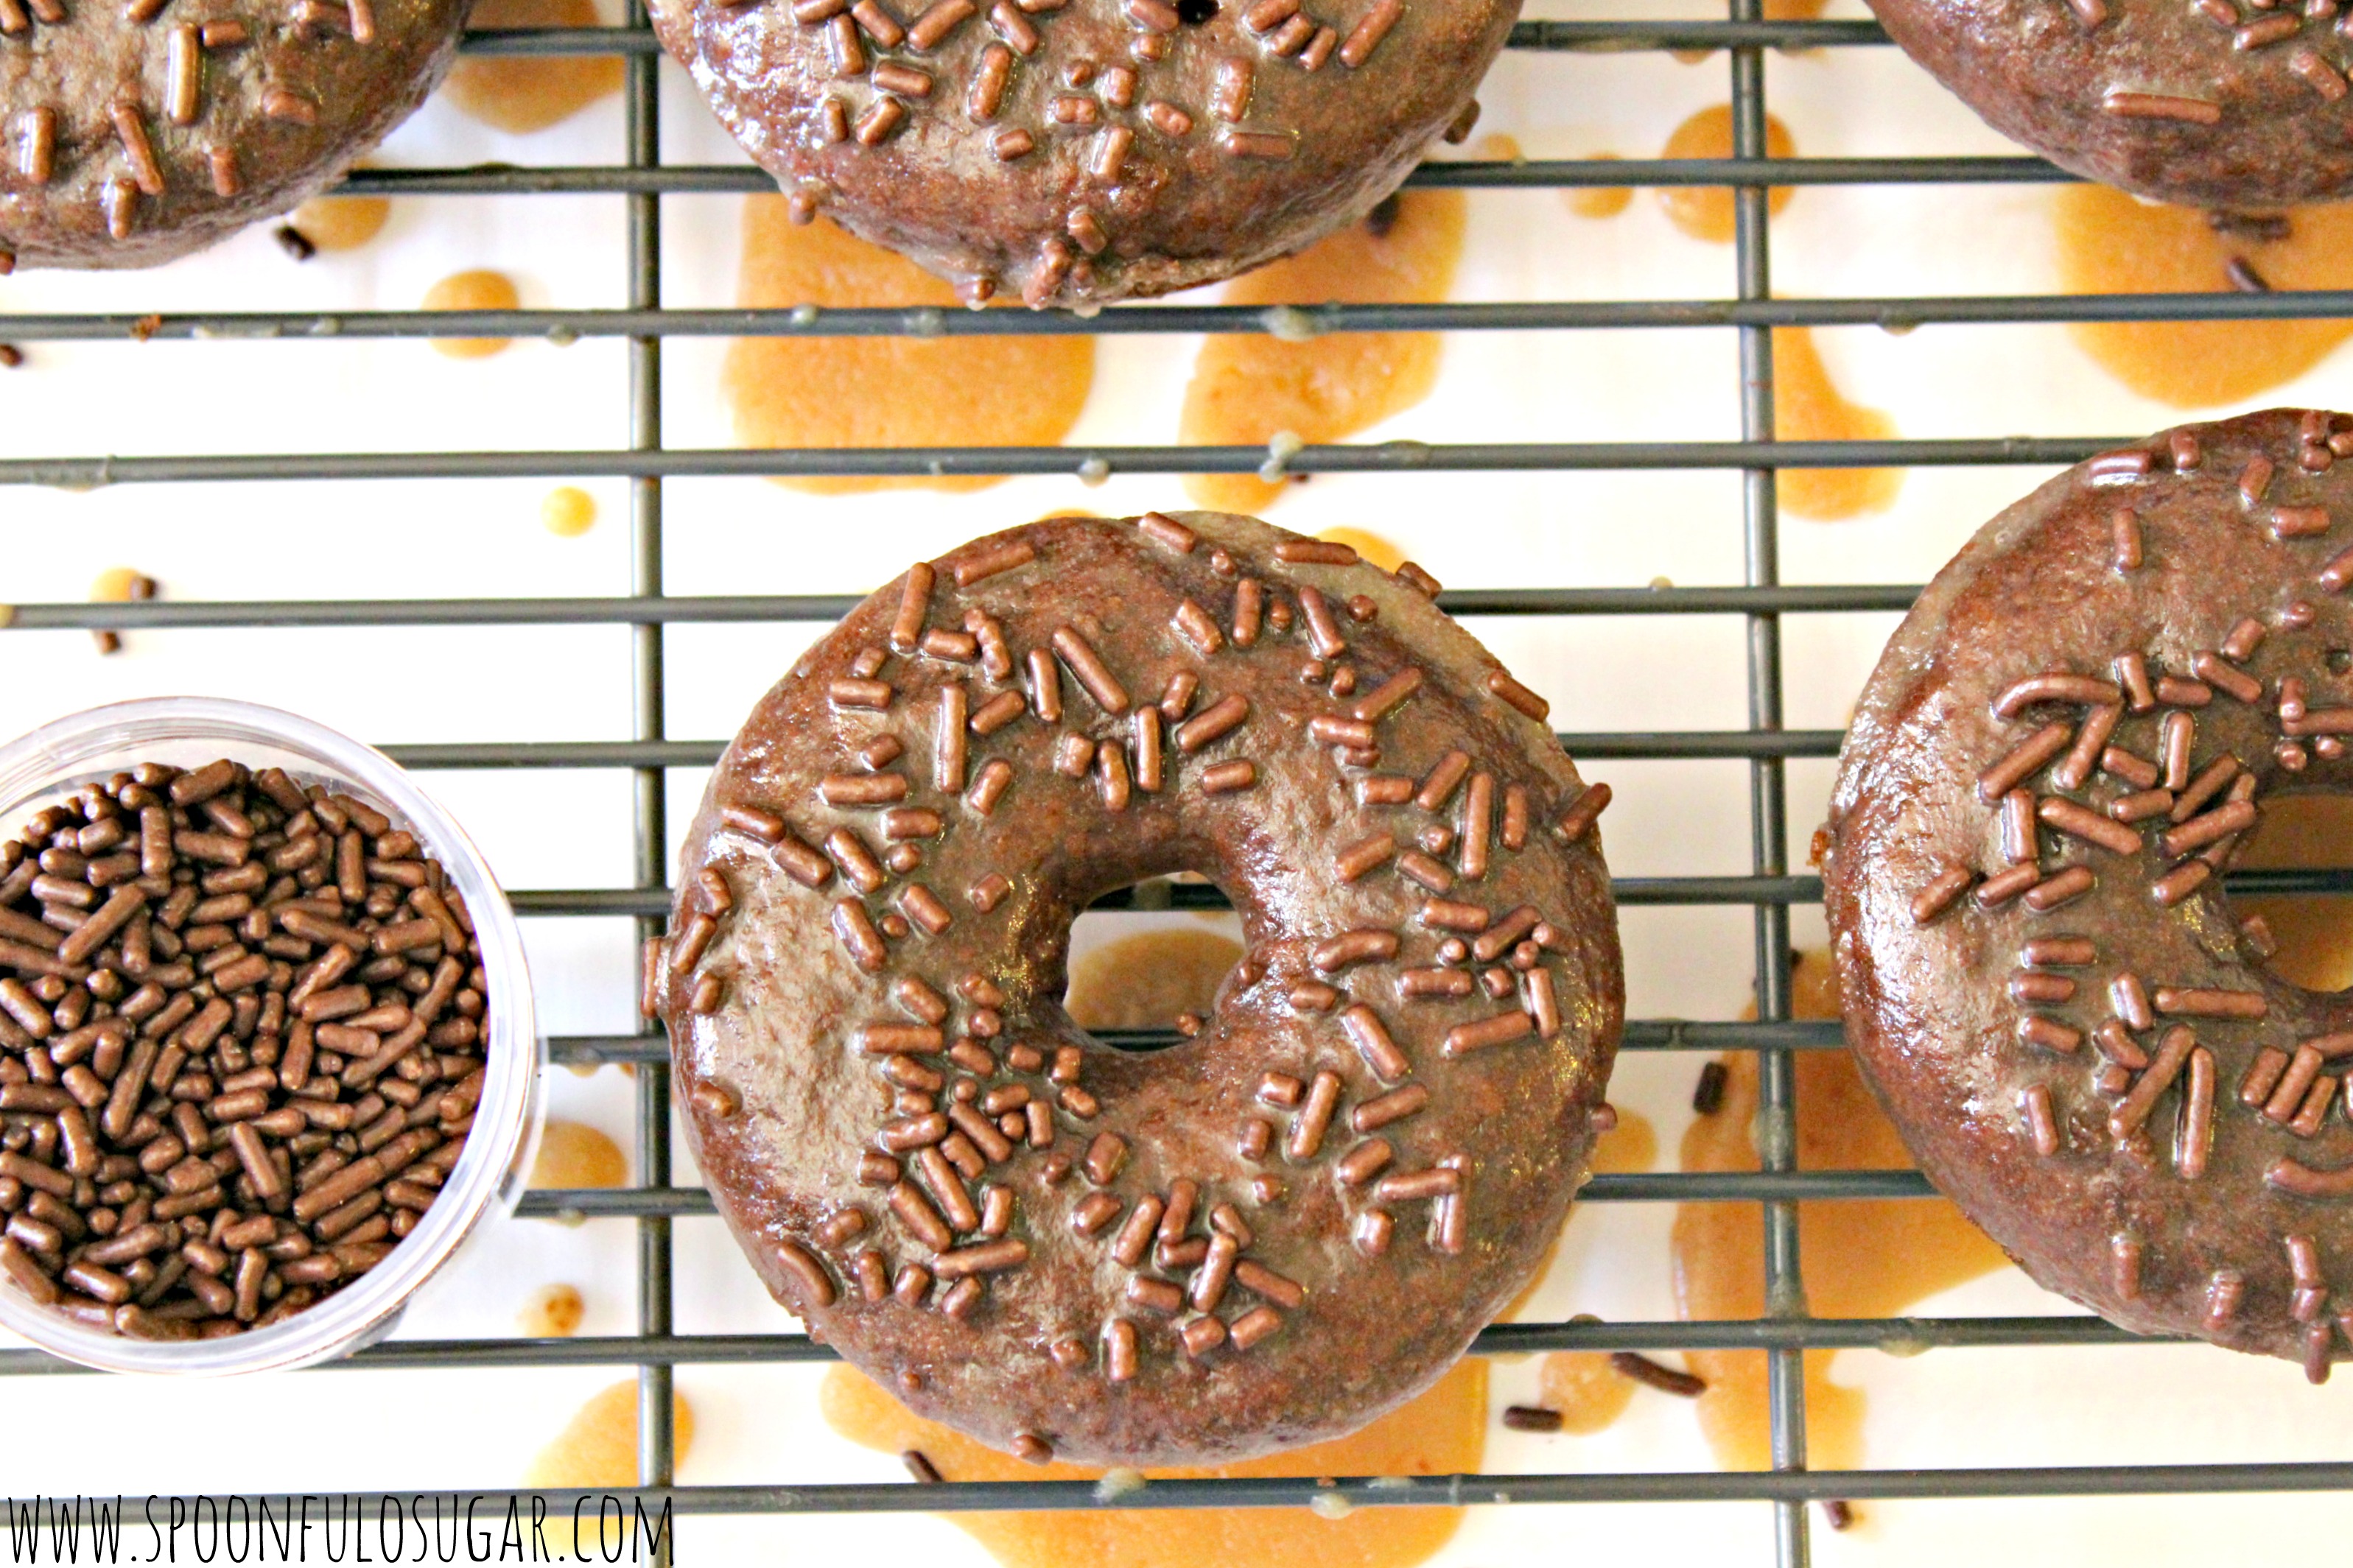 Mocha Donuts with Salted Caramel Glaze | Spoonful of Sugar